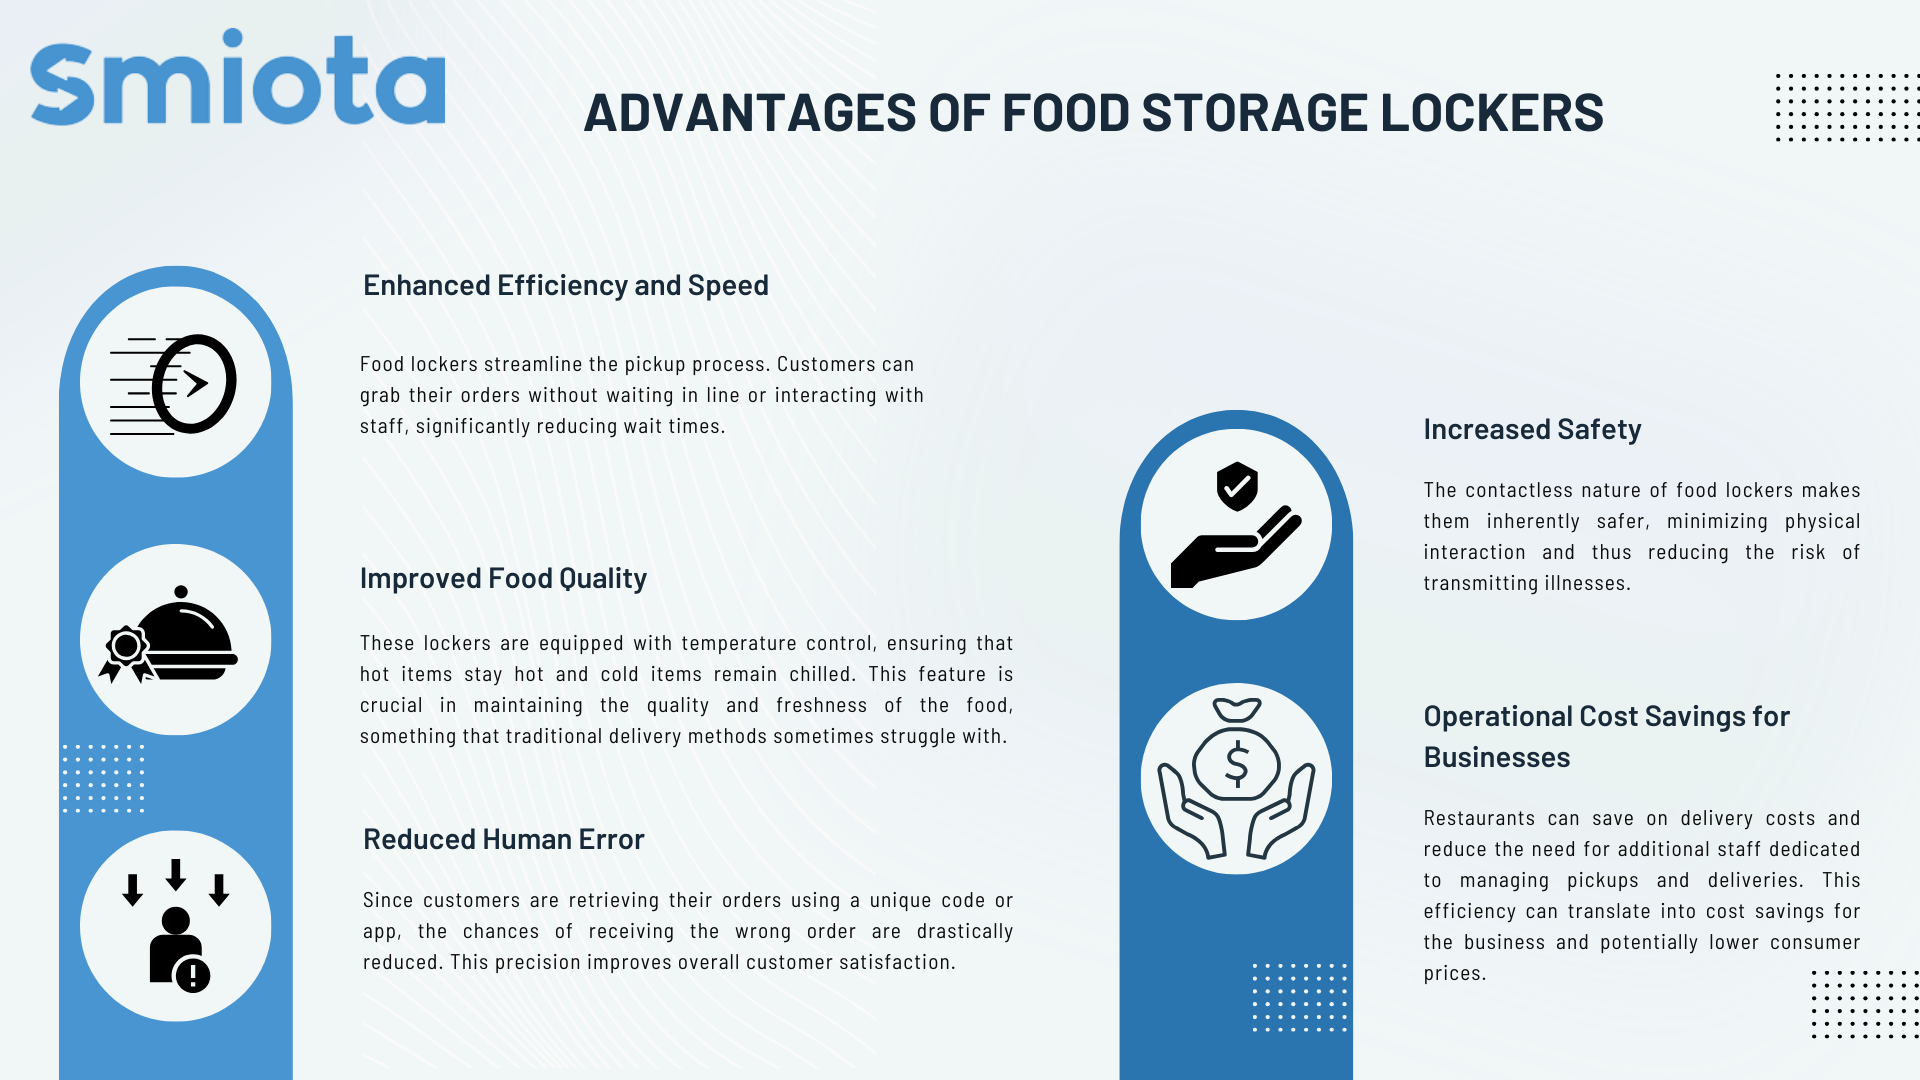 Why Food Lockers Are Poised to Be the Next Big Thing in Fast Food